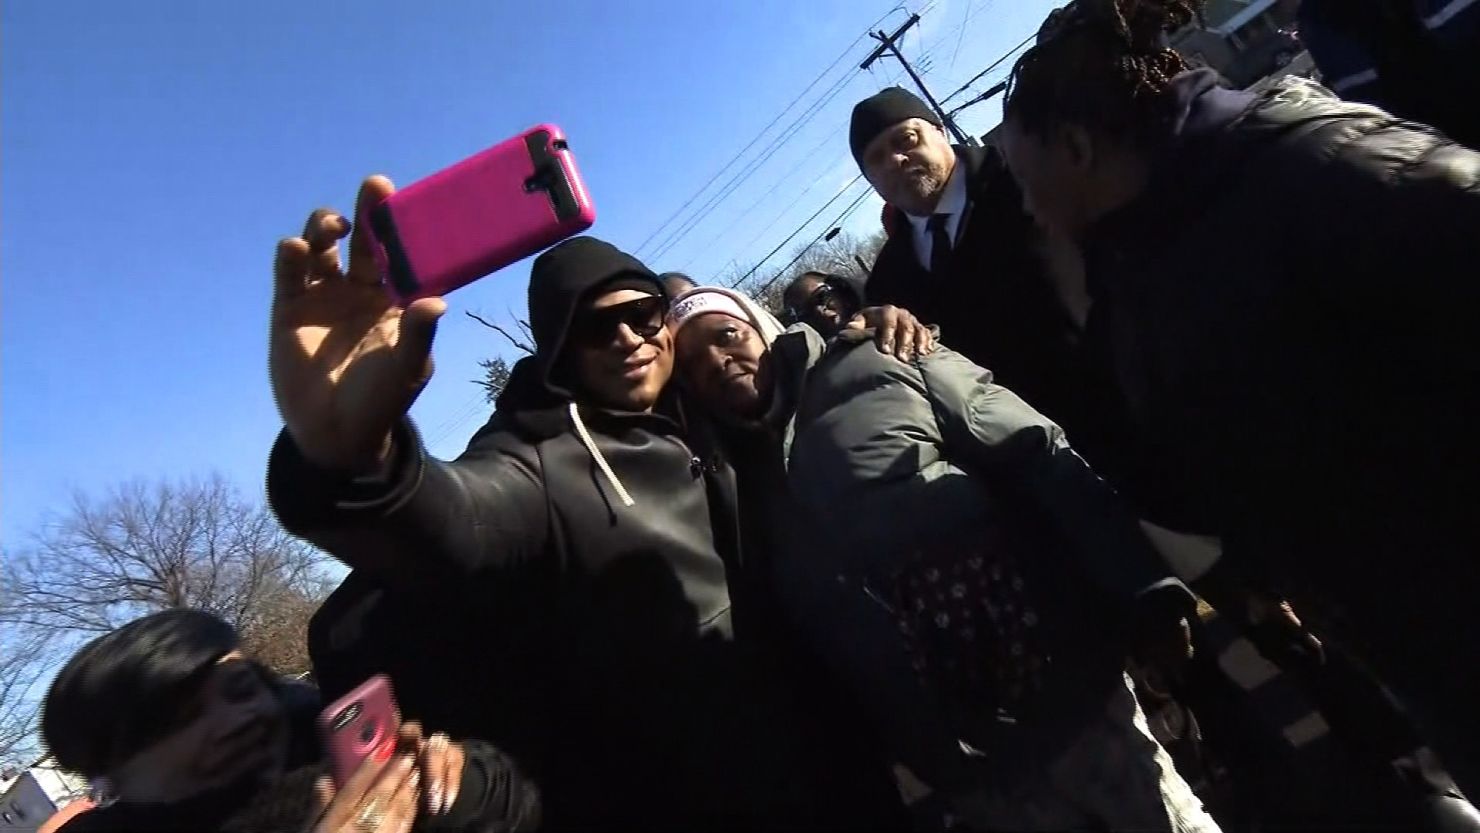 LL Cool J takes selfies with residents in the neighborhood where he grew up.